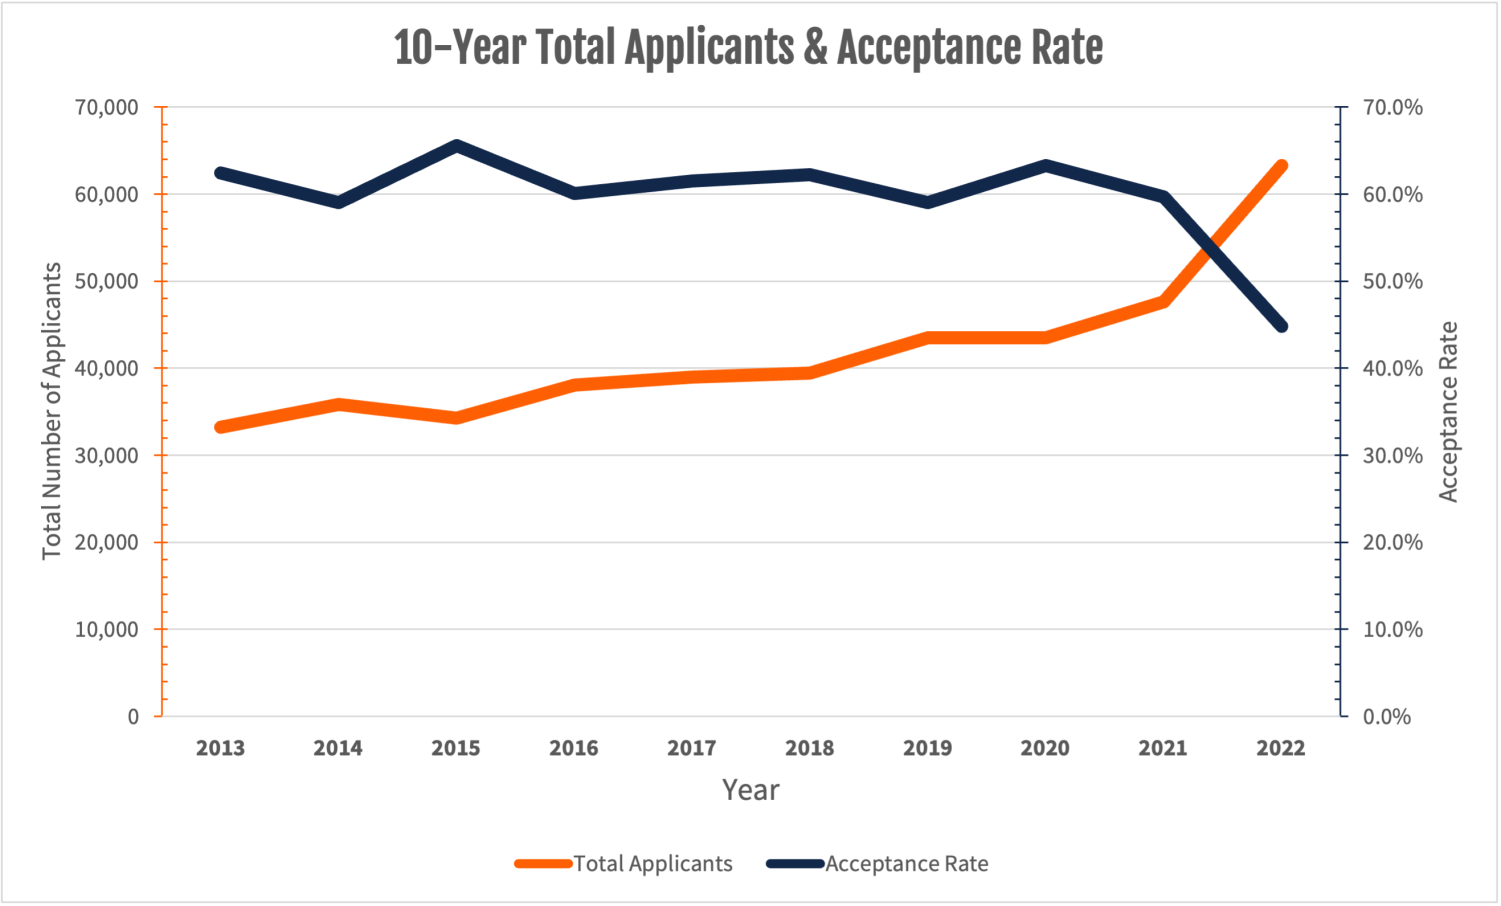 UI acceptance rate drops to lowest on record as number of applicants